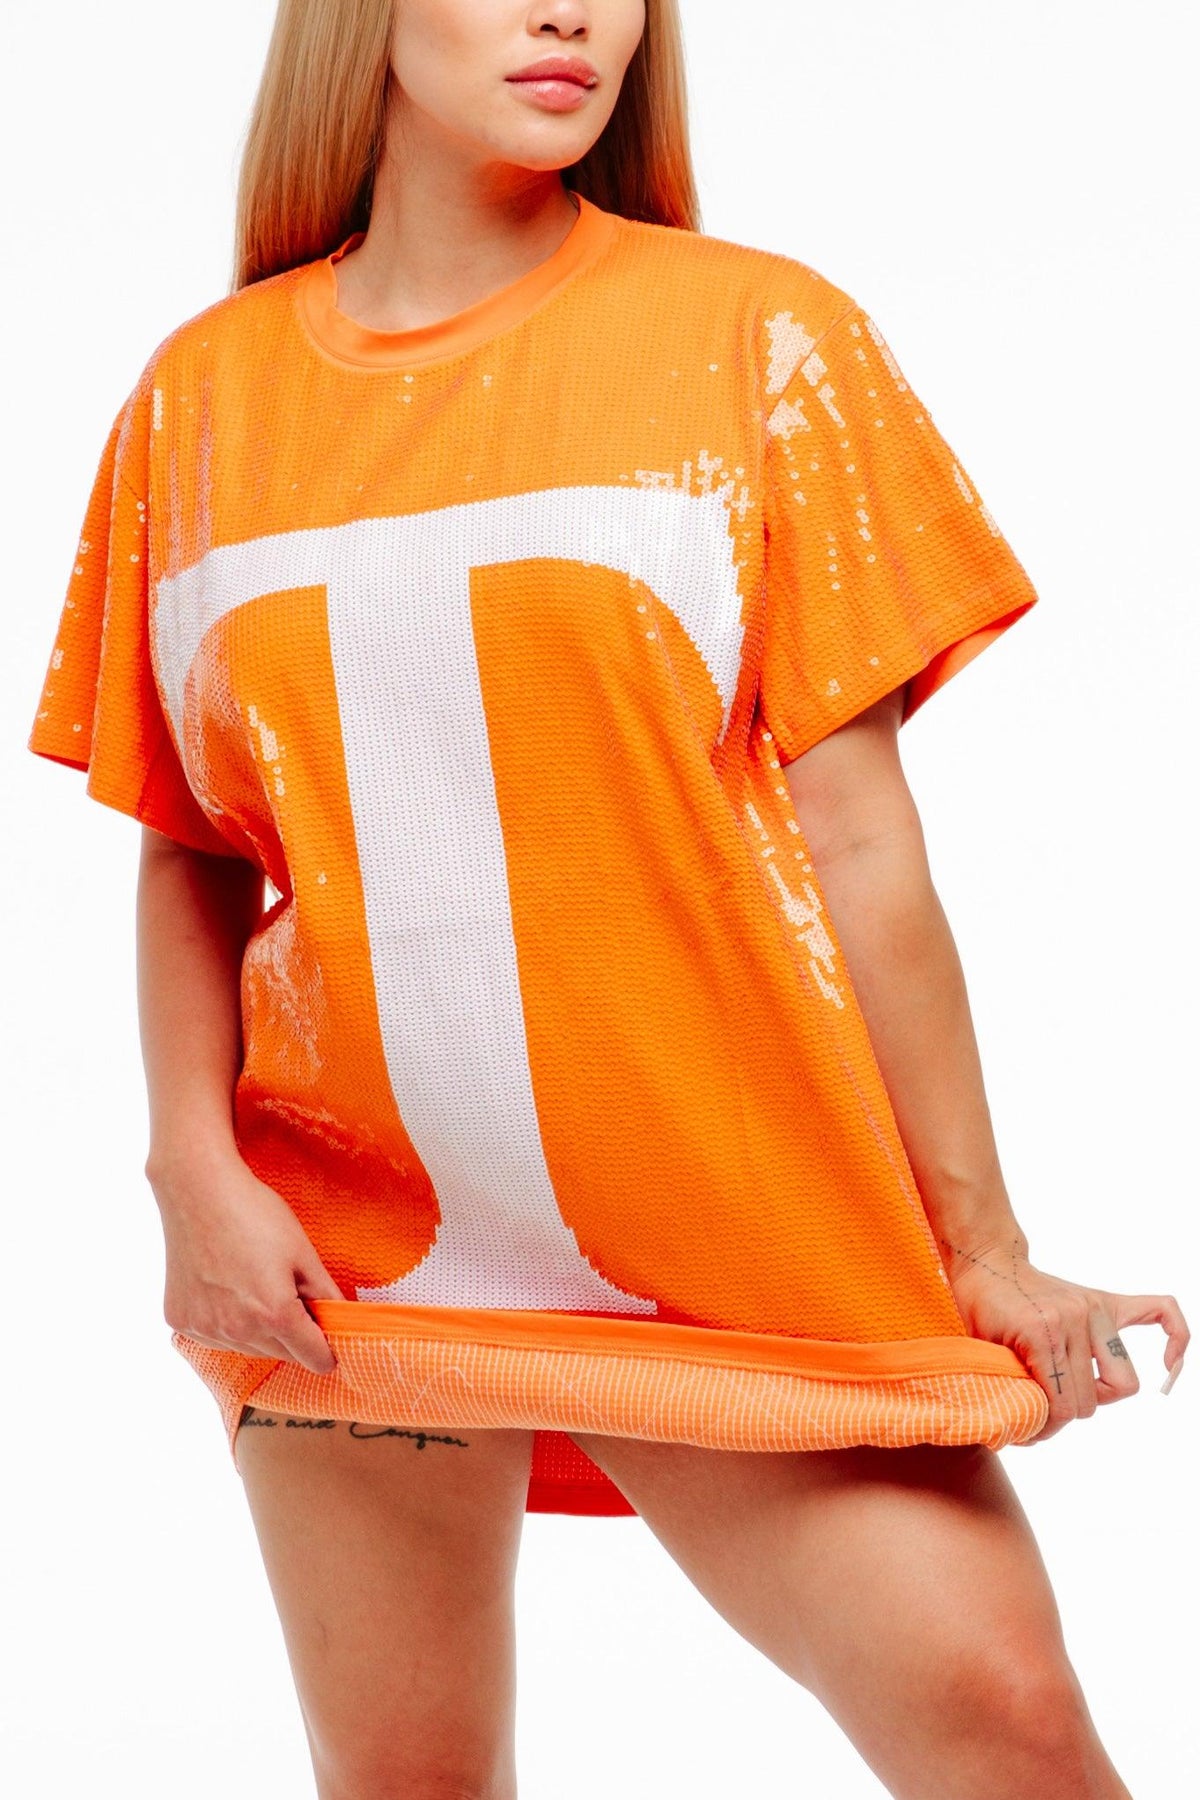 Tennessee College Sequin Dress - SEQUIN FANS